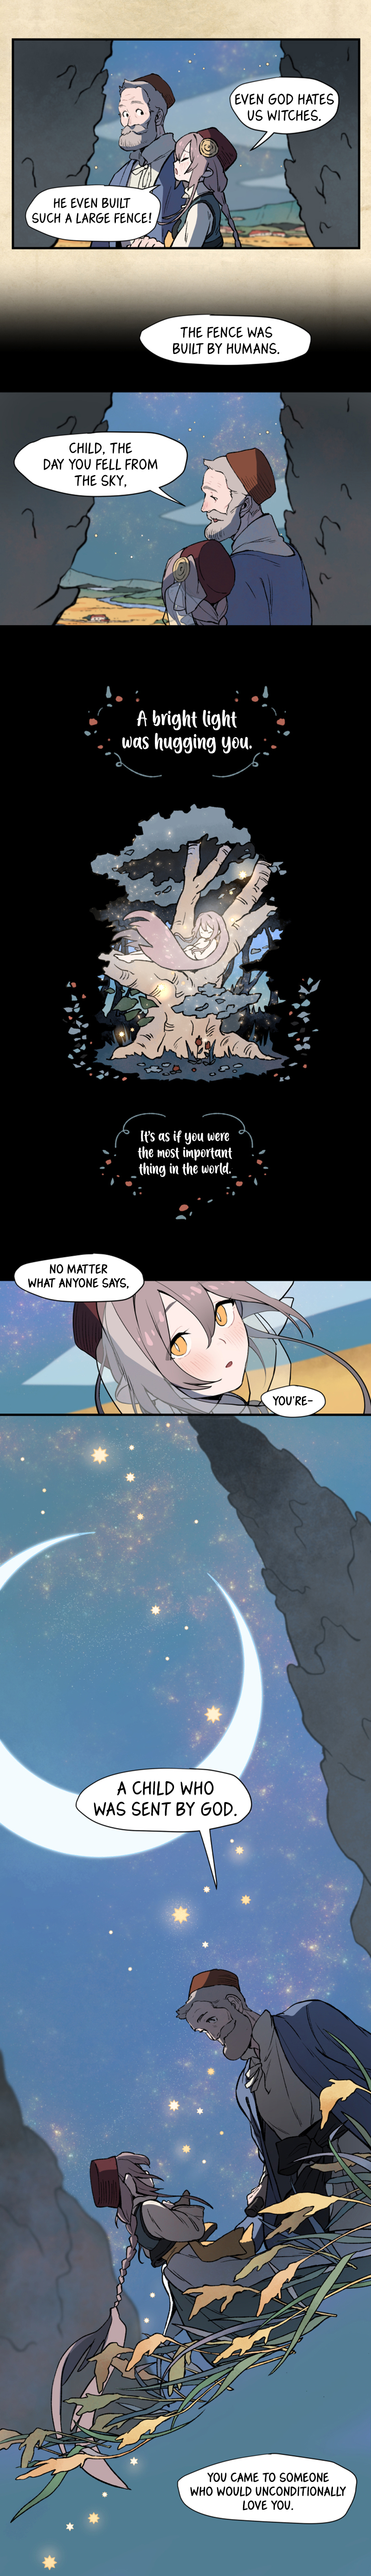 Where The Shooting Star Falls, Wait There. Ch. 2 Elder Ozan Who Picked A Star